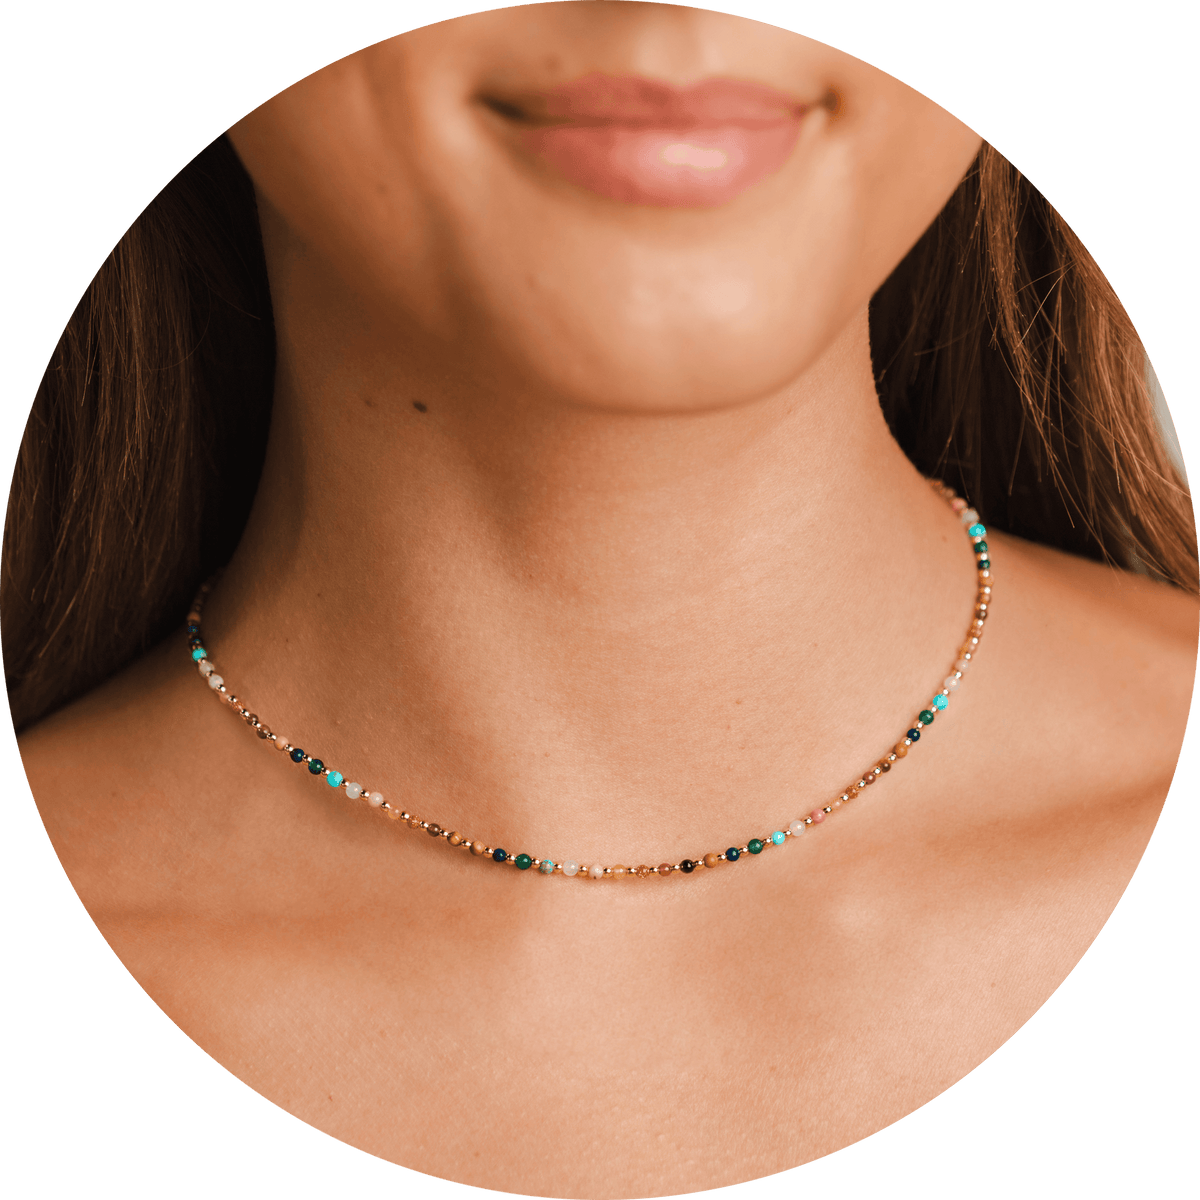 Model wearing a 2mm multicolor and gold bead healing necklace